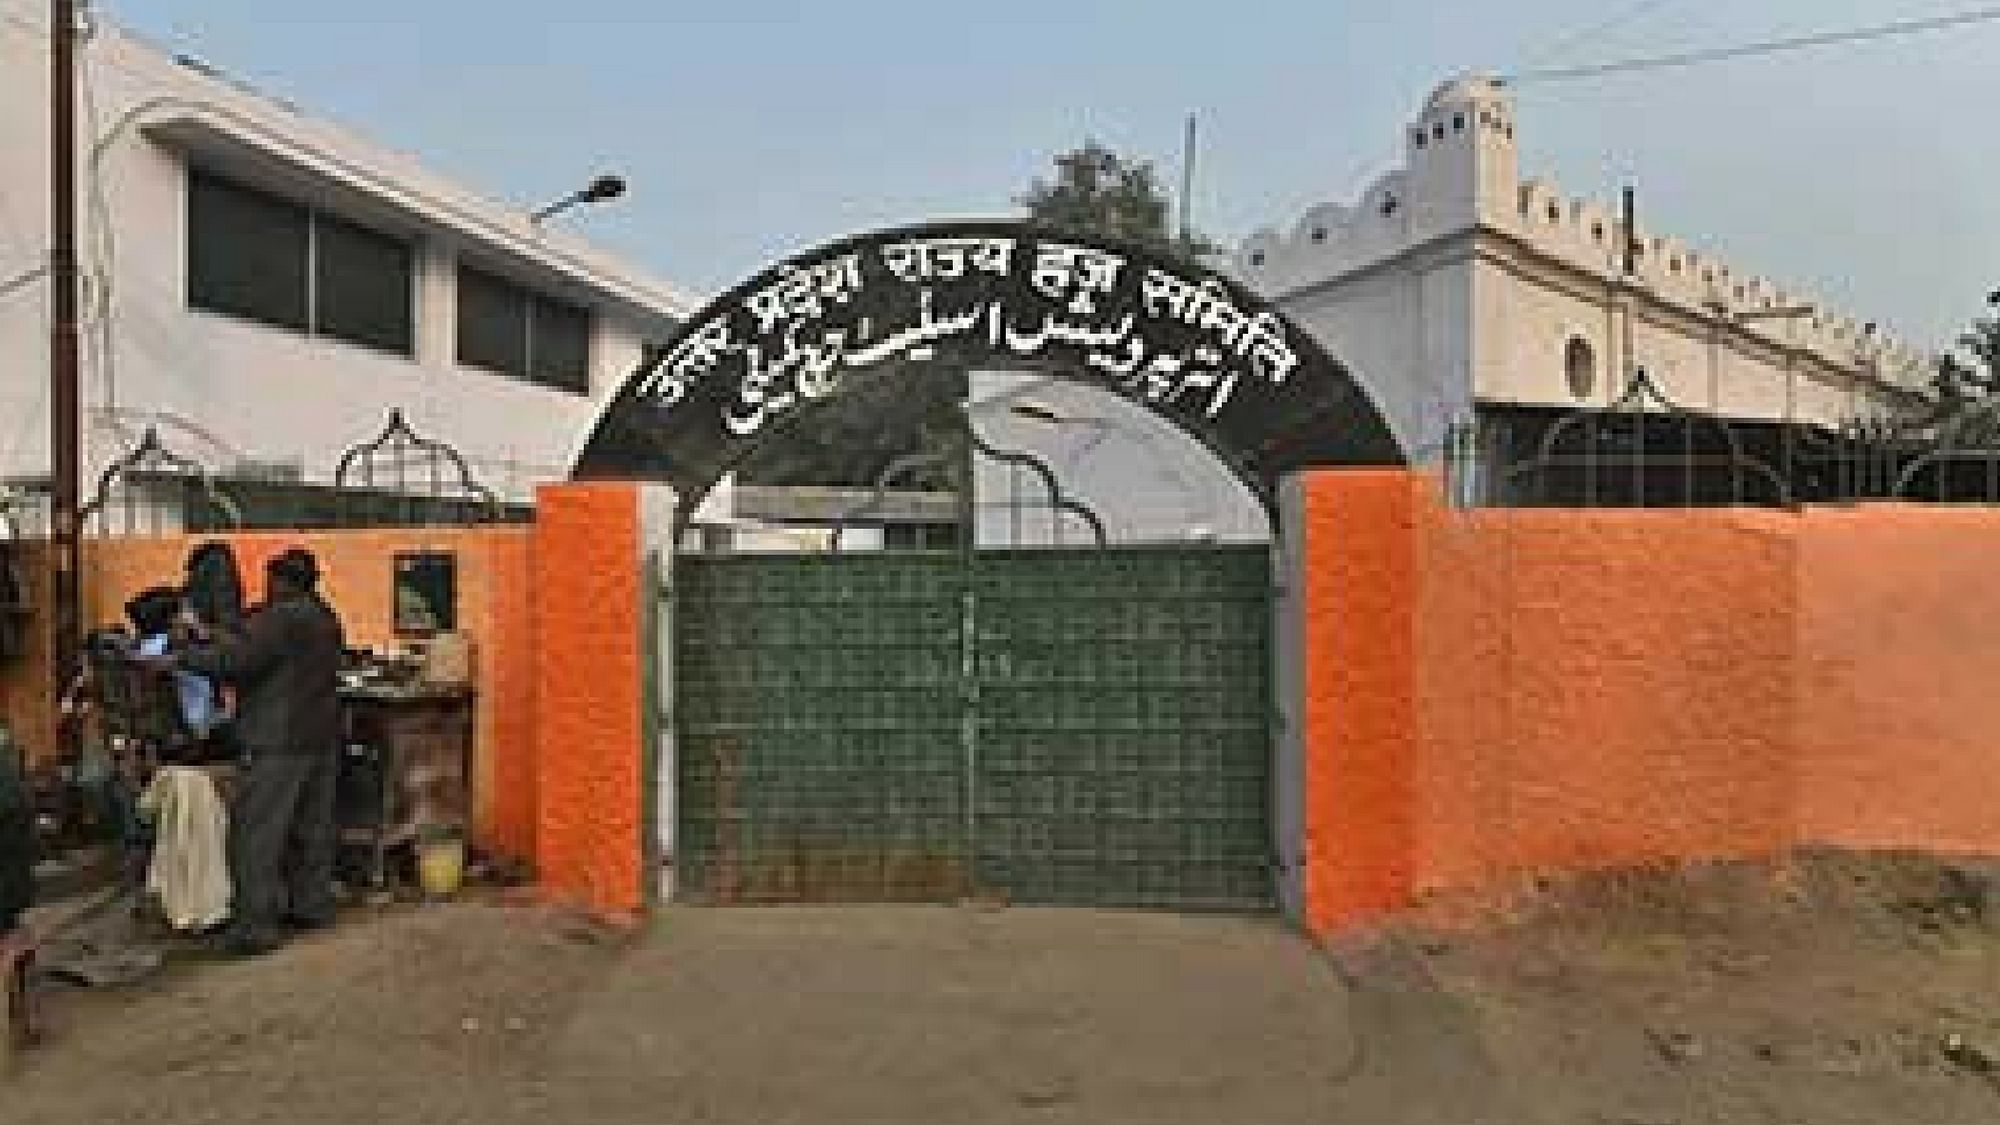 The UP govt faced flak for giving a bright saffron coat of paint to the boundary wall of the UP Haj Committee office in Lucknow.